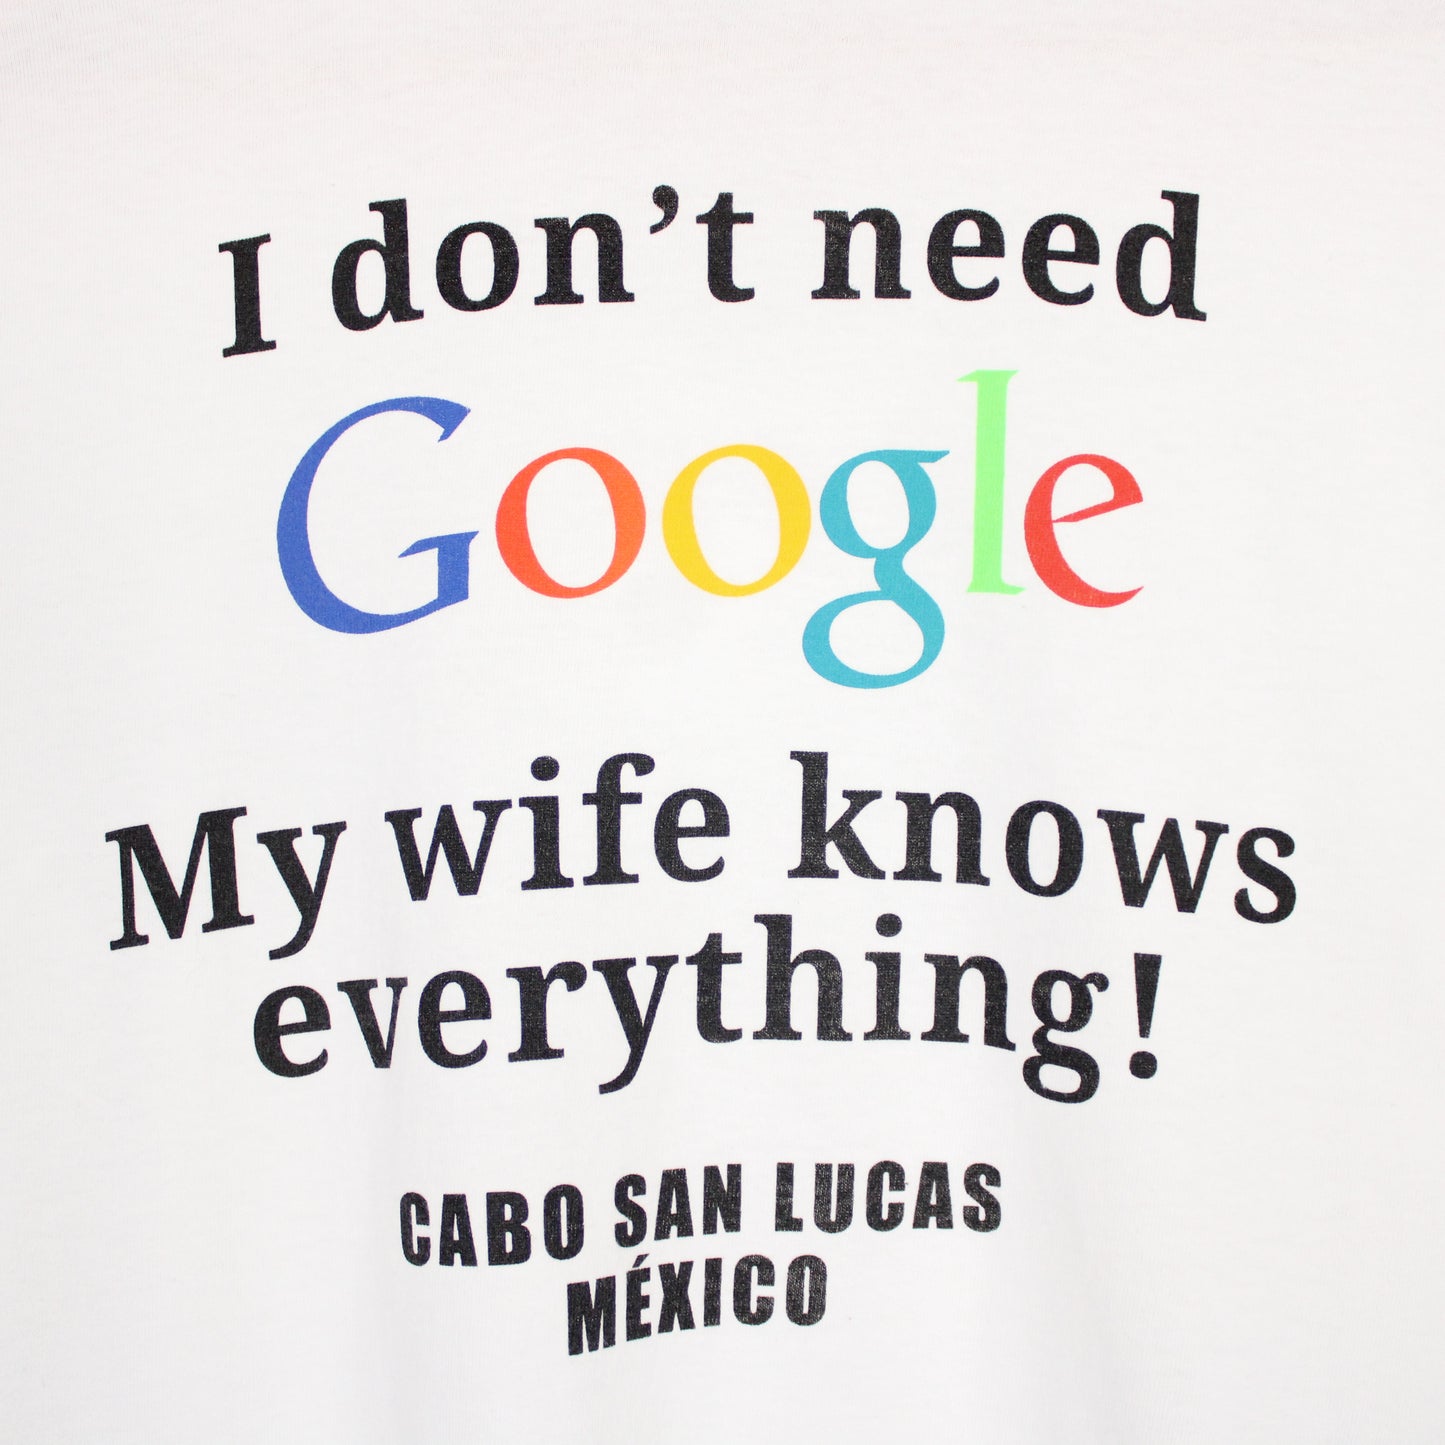 Vintage I Don't Need Google, My Wife Knows Everything Tee - M